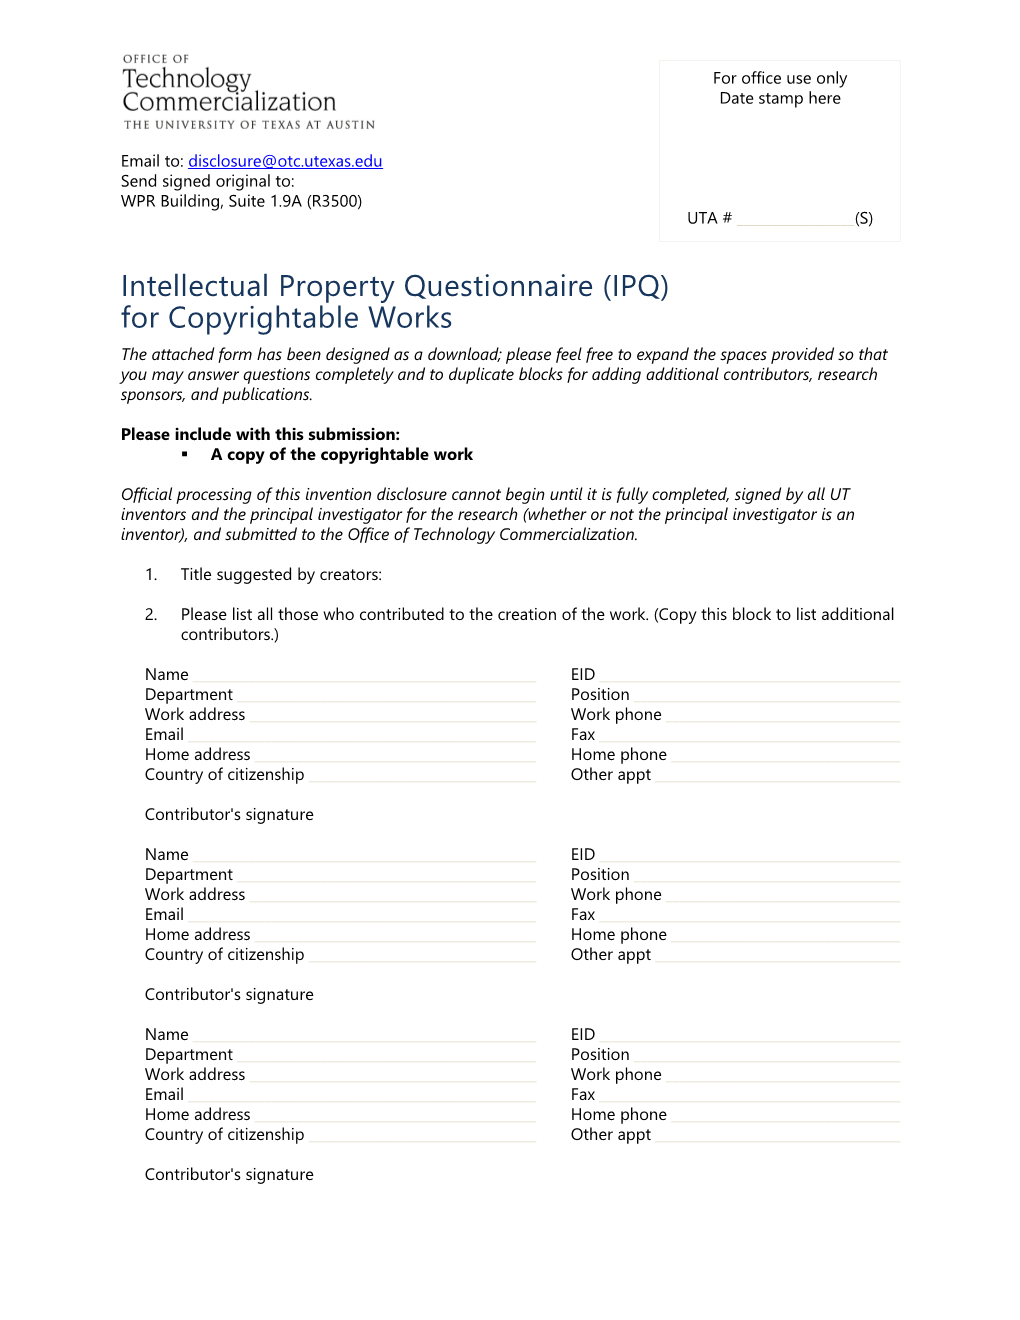 Intellectual Property Questionnaire - Copyright